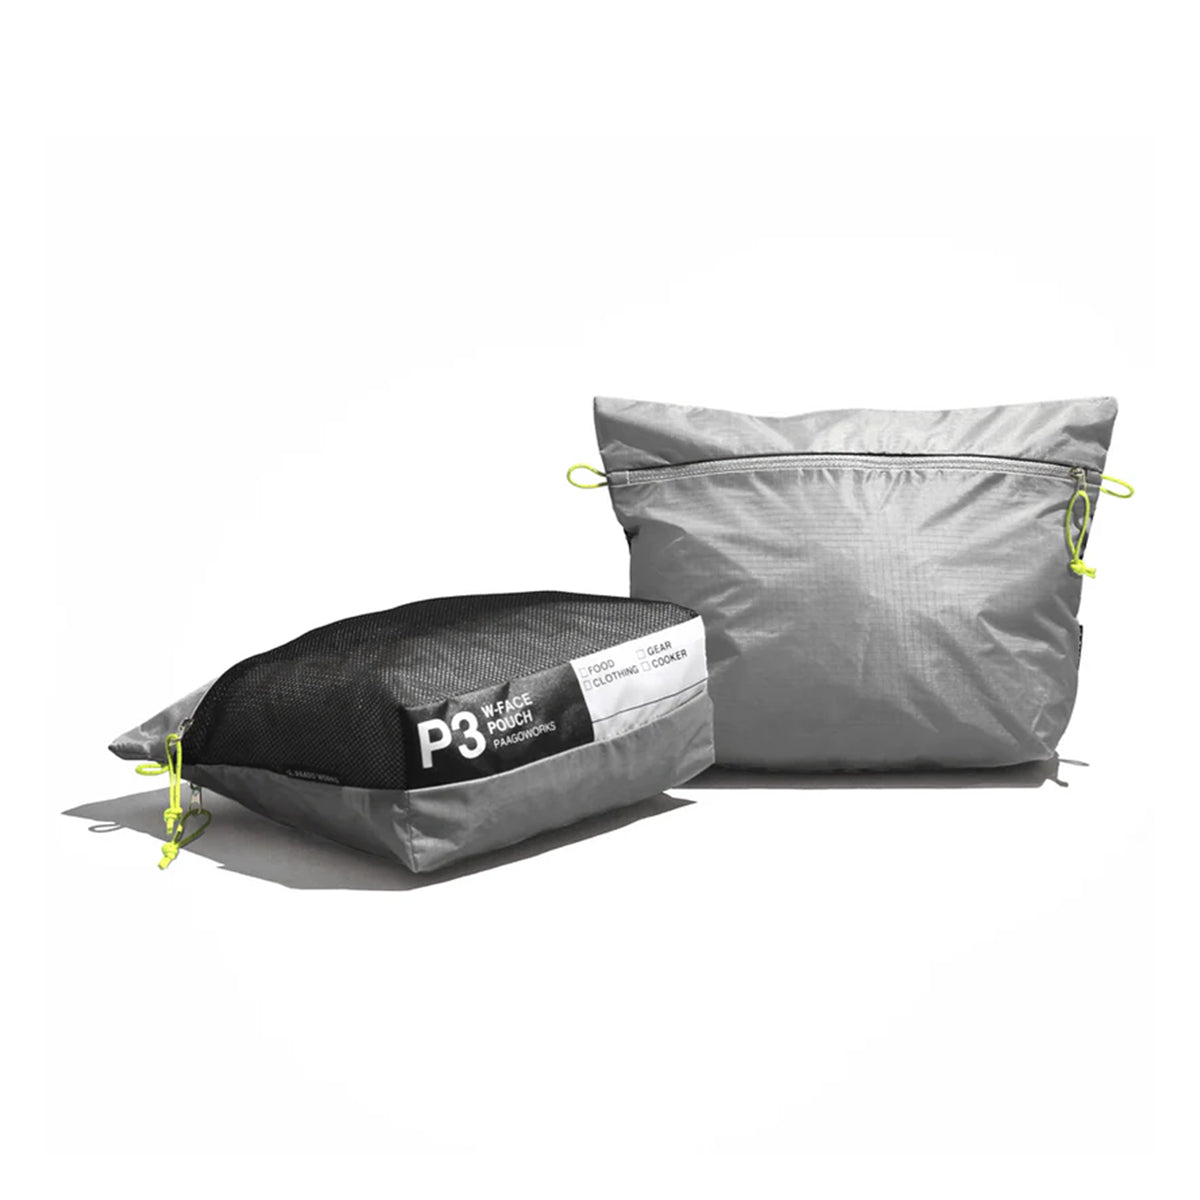 PAAGO WORKS PARGO WORKS W-FACE Pouch 3